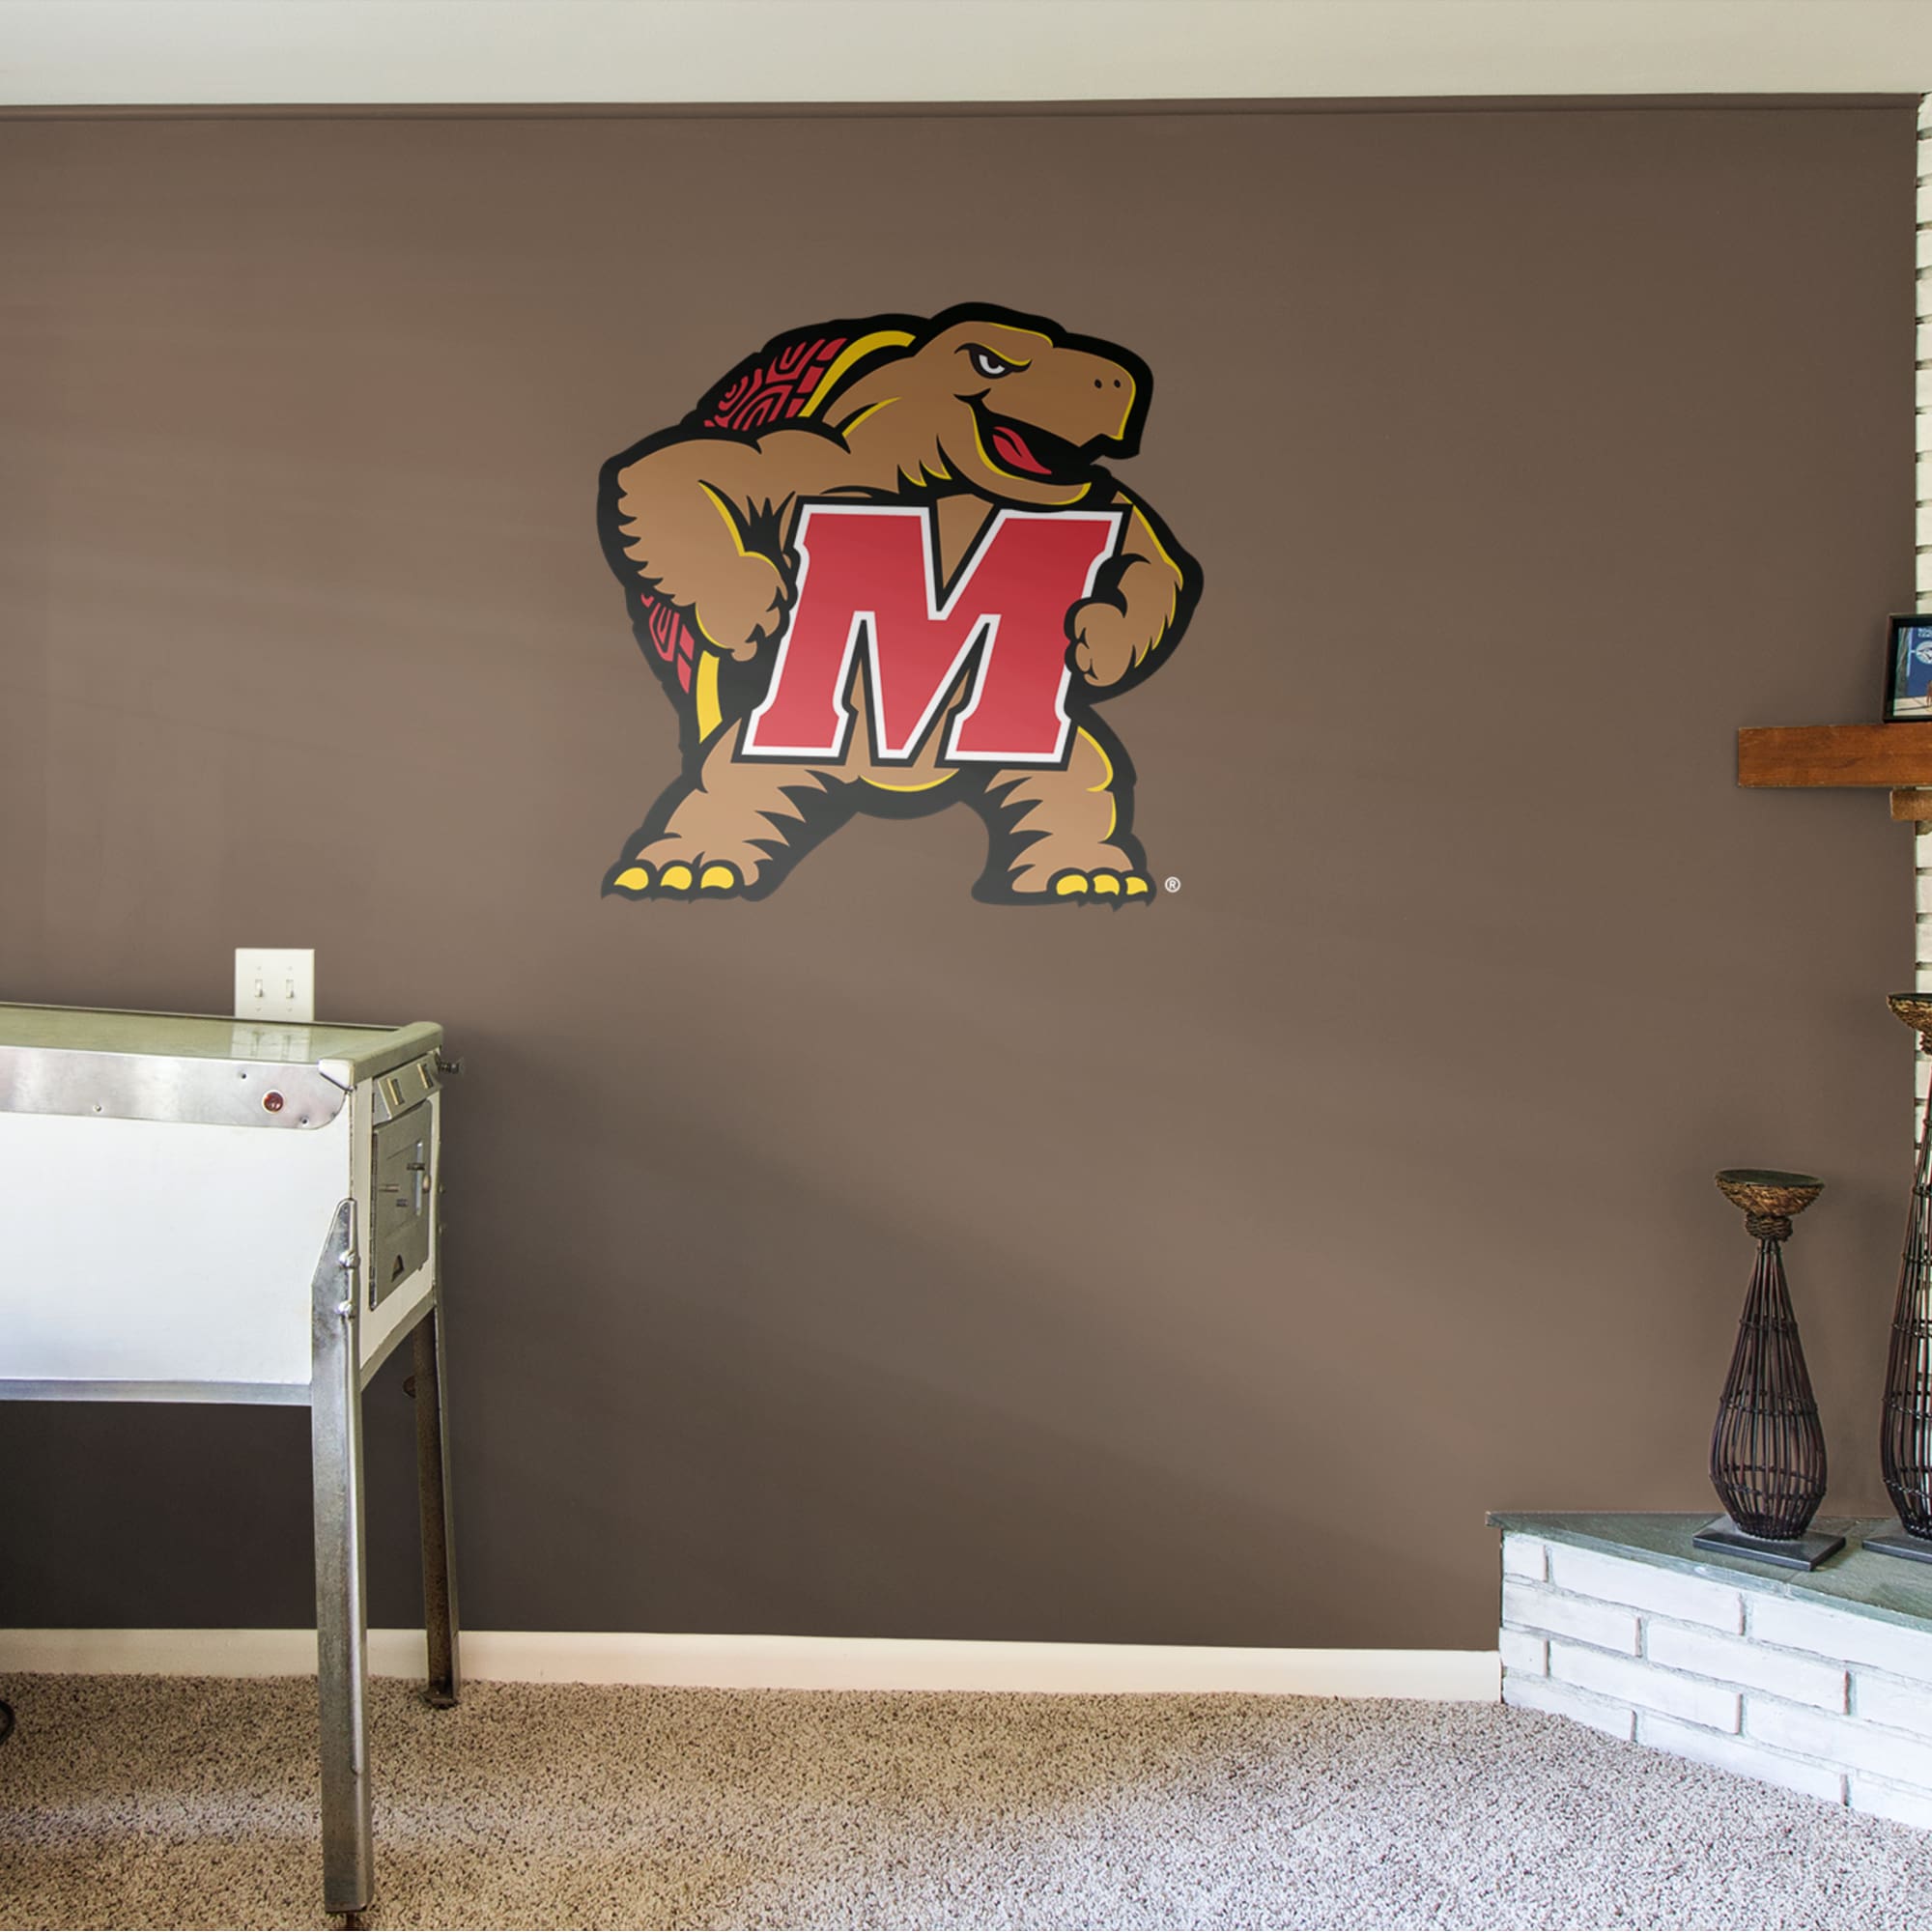 Maryland Terrapins: Logo - Officially Licensed Removable Wall Decal 38.0"W x 39.0"H by Fathead | Vinyl